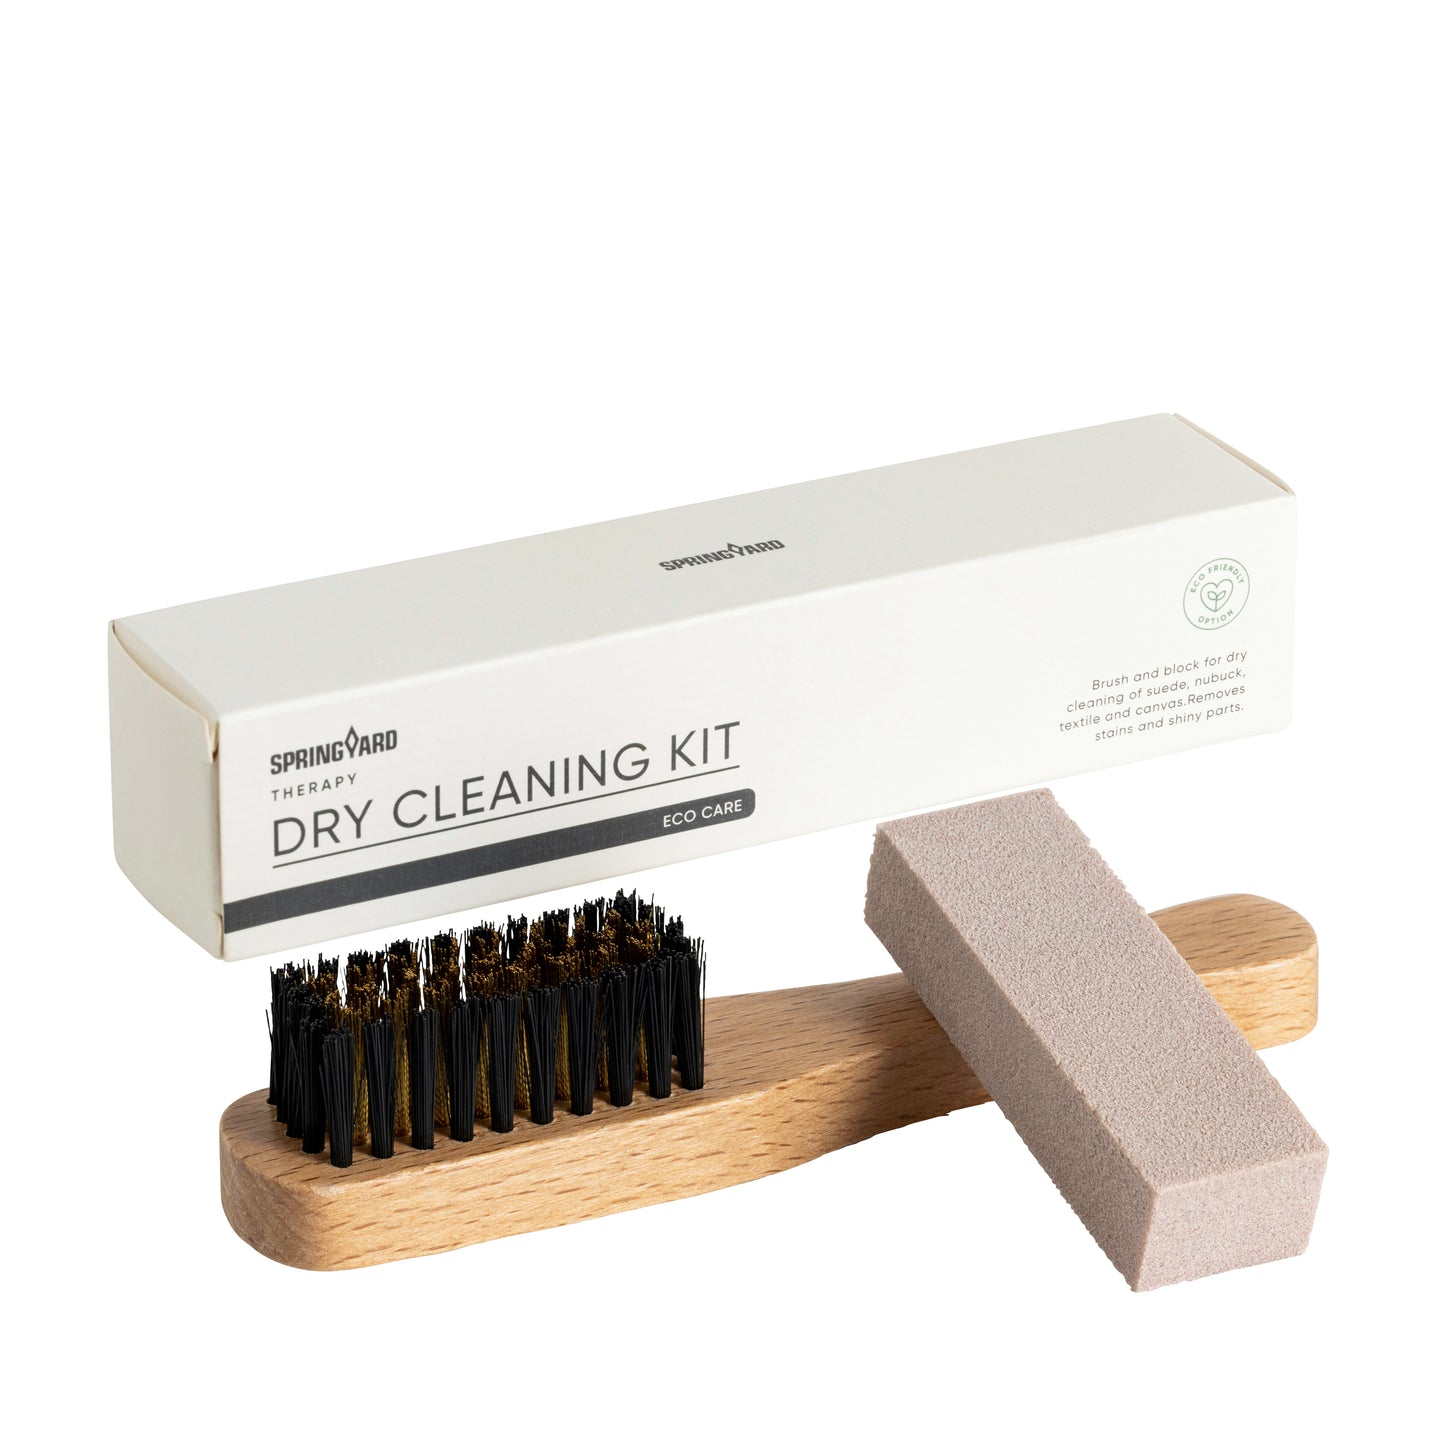 SPRINGYARD Dry Cleaning Kit